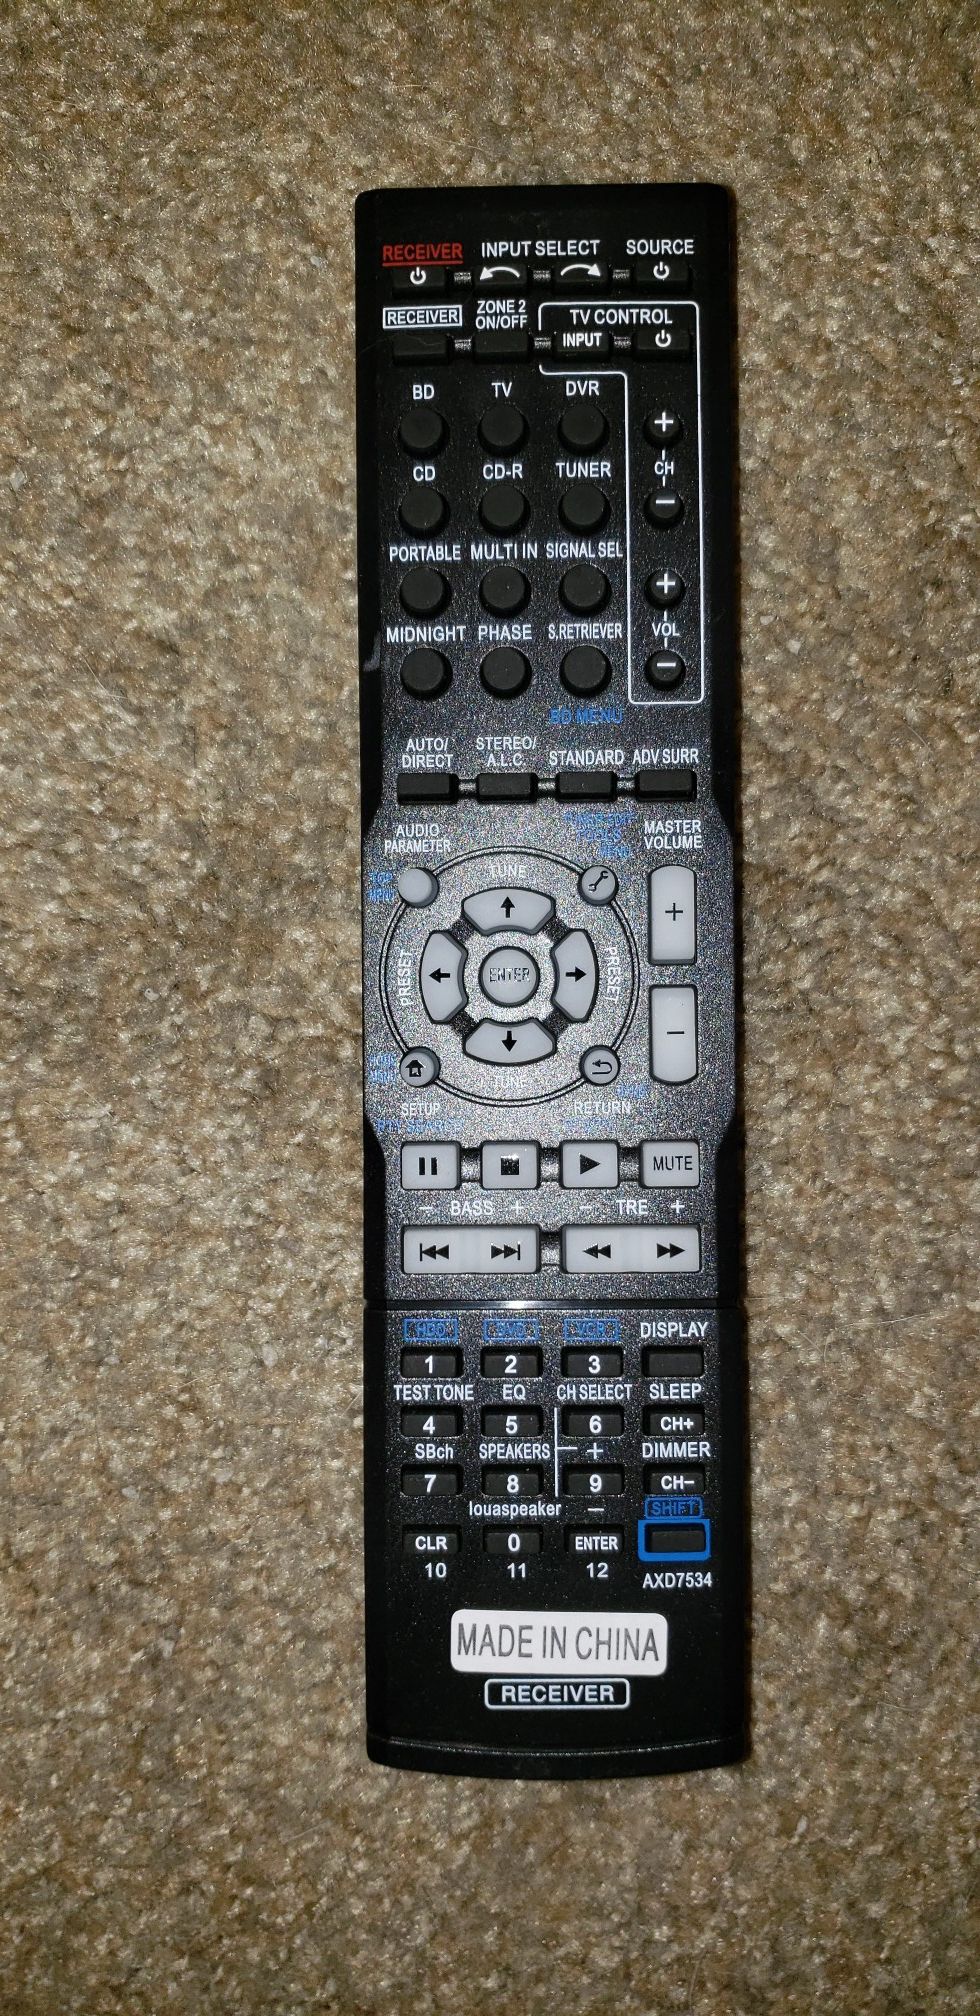 BRAND NEW remote compatible with Pioneer models ***please read details to see what products it is compatible with)